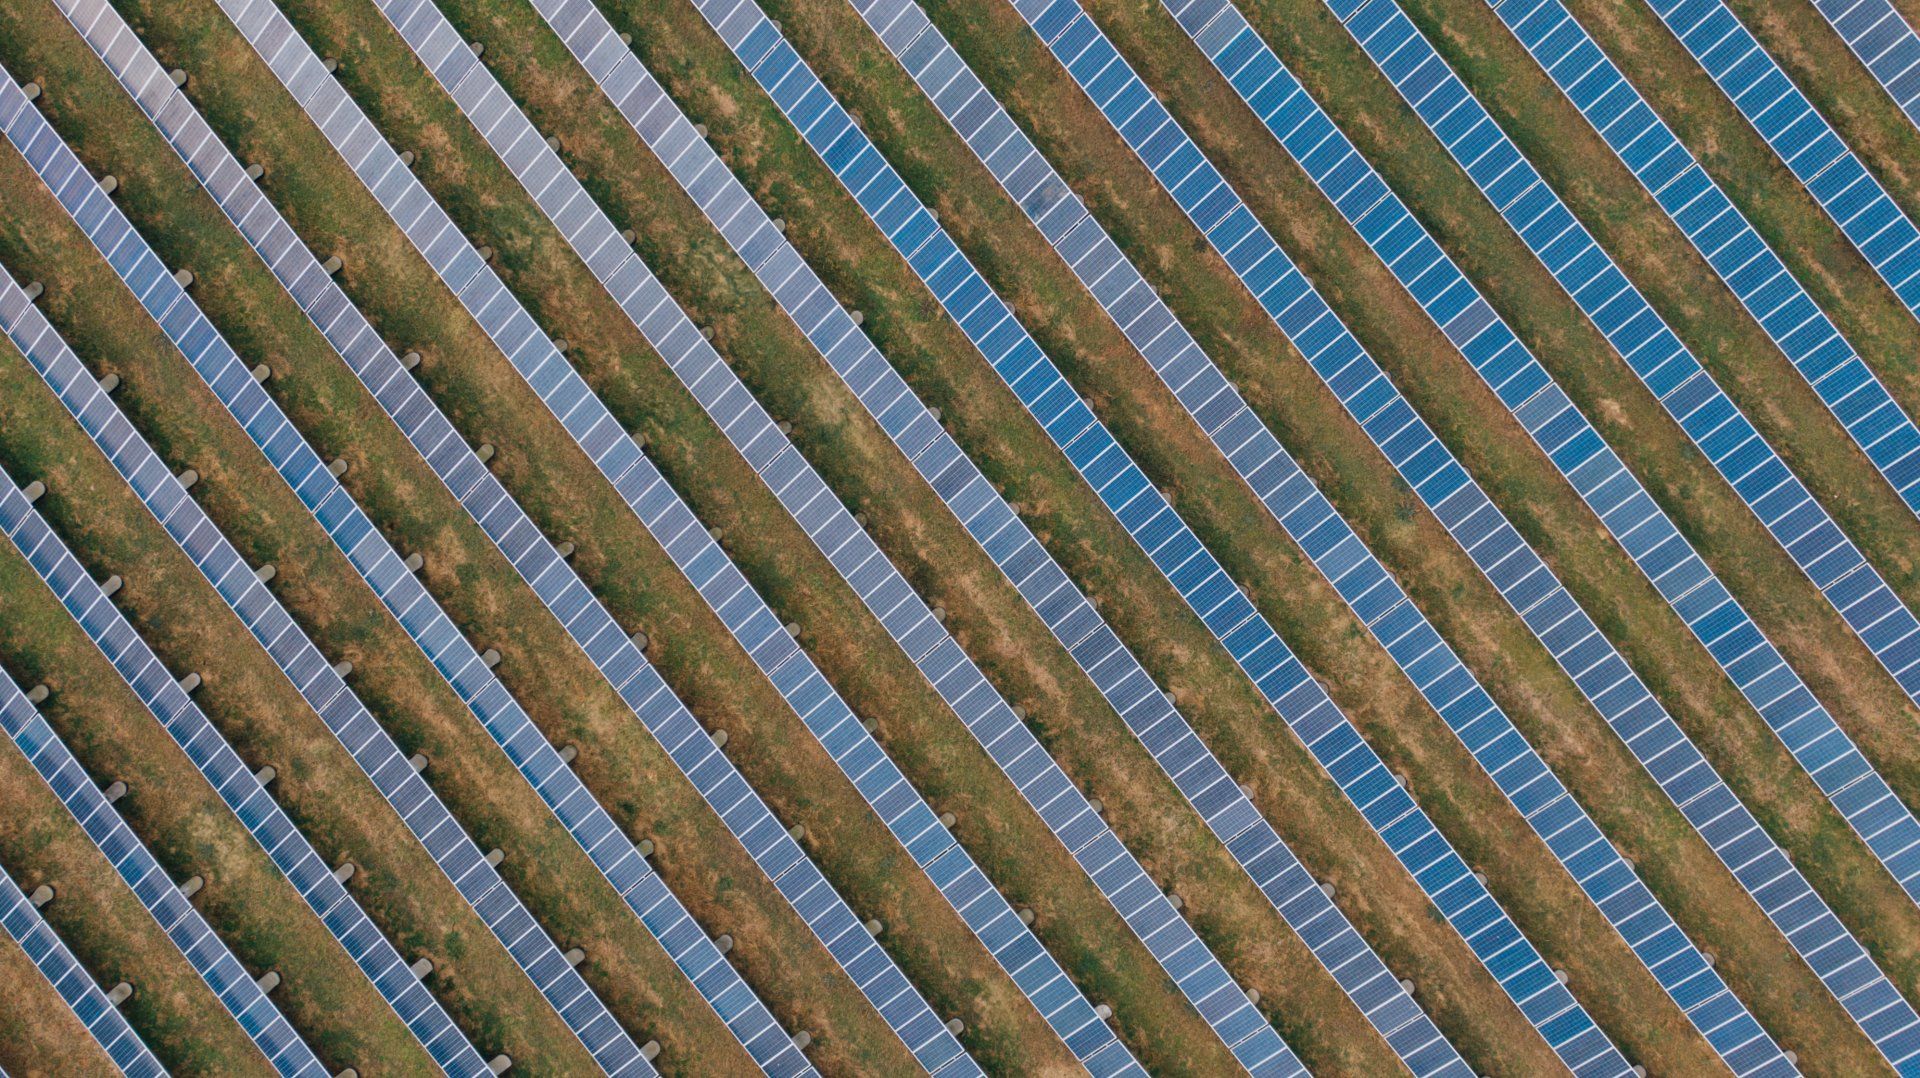 An aerial view of rows of solar panels in a field